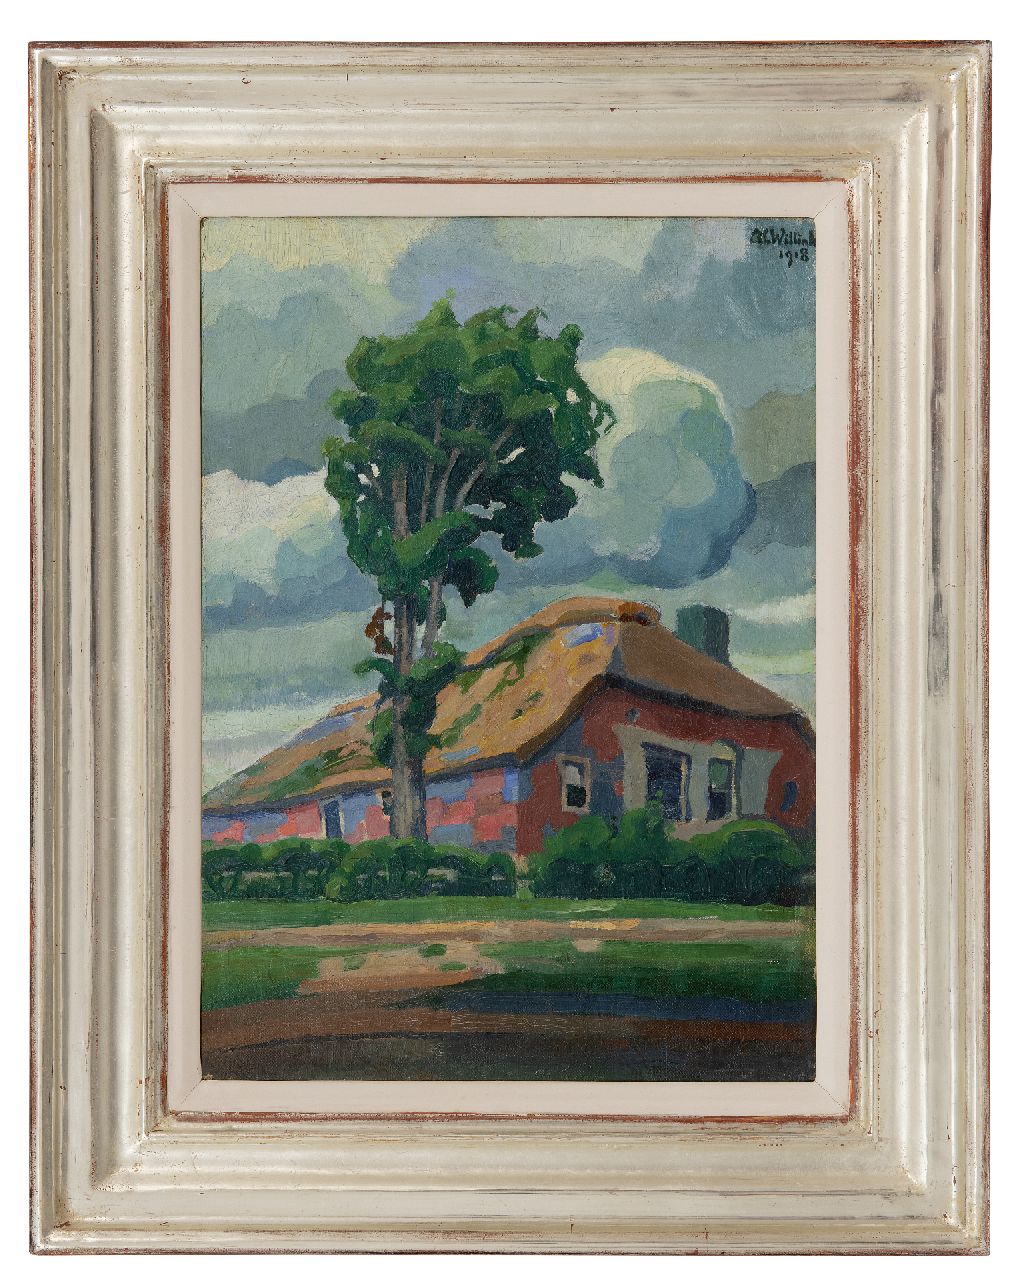 Willink A.C.  | Albert 'Carel' Willink | Paintings offered for sale | A farm with tree, oil on canvas 48.0 x 34.3 cm, signed u.r. and painted 1918